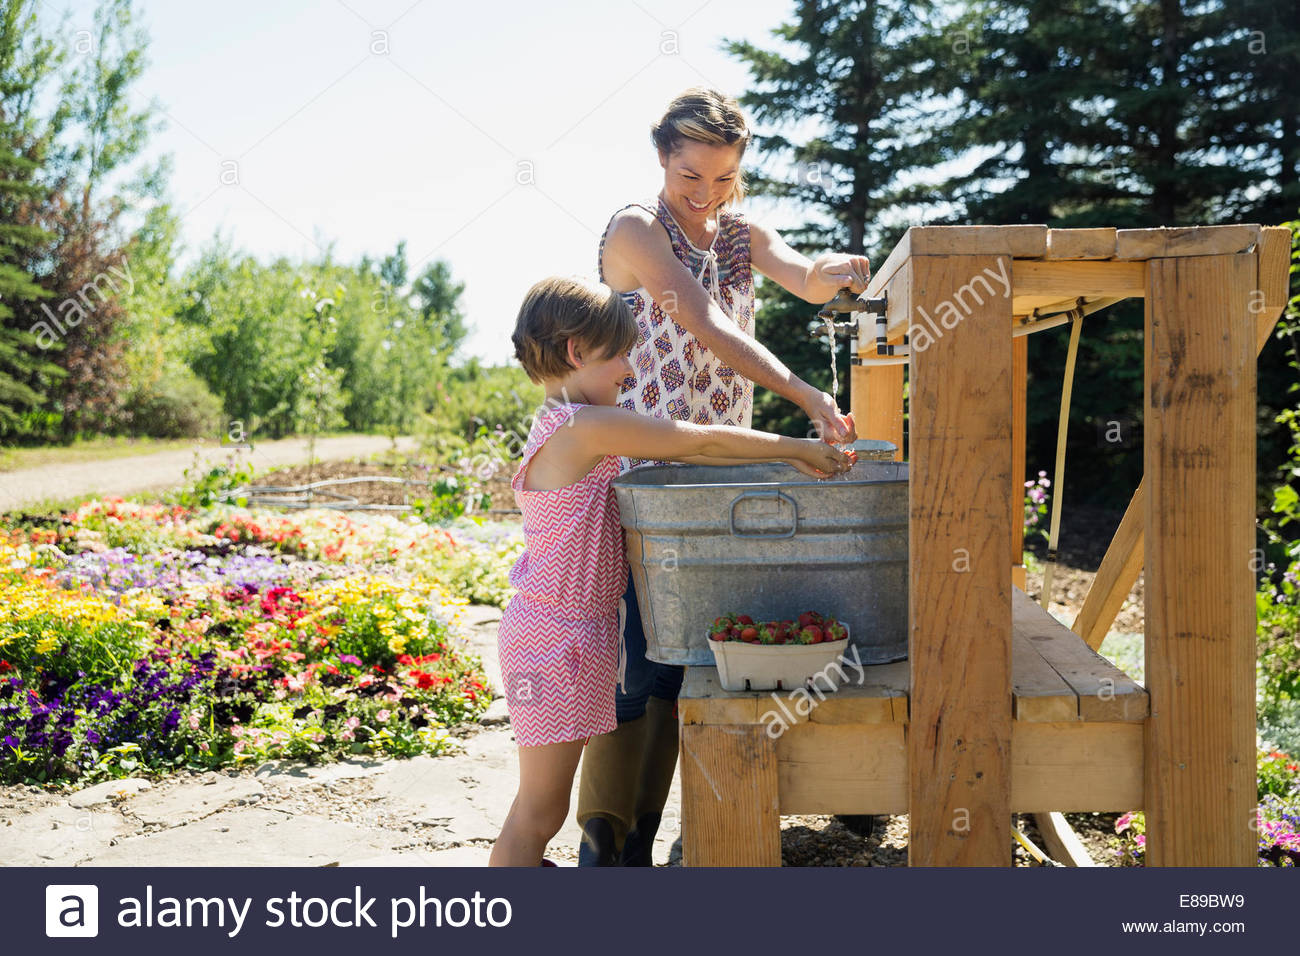 Mother and daughter rinsing fresh picked berries Stock Photo